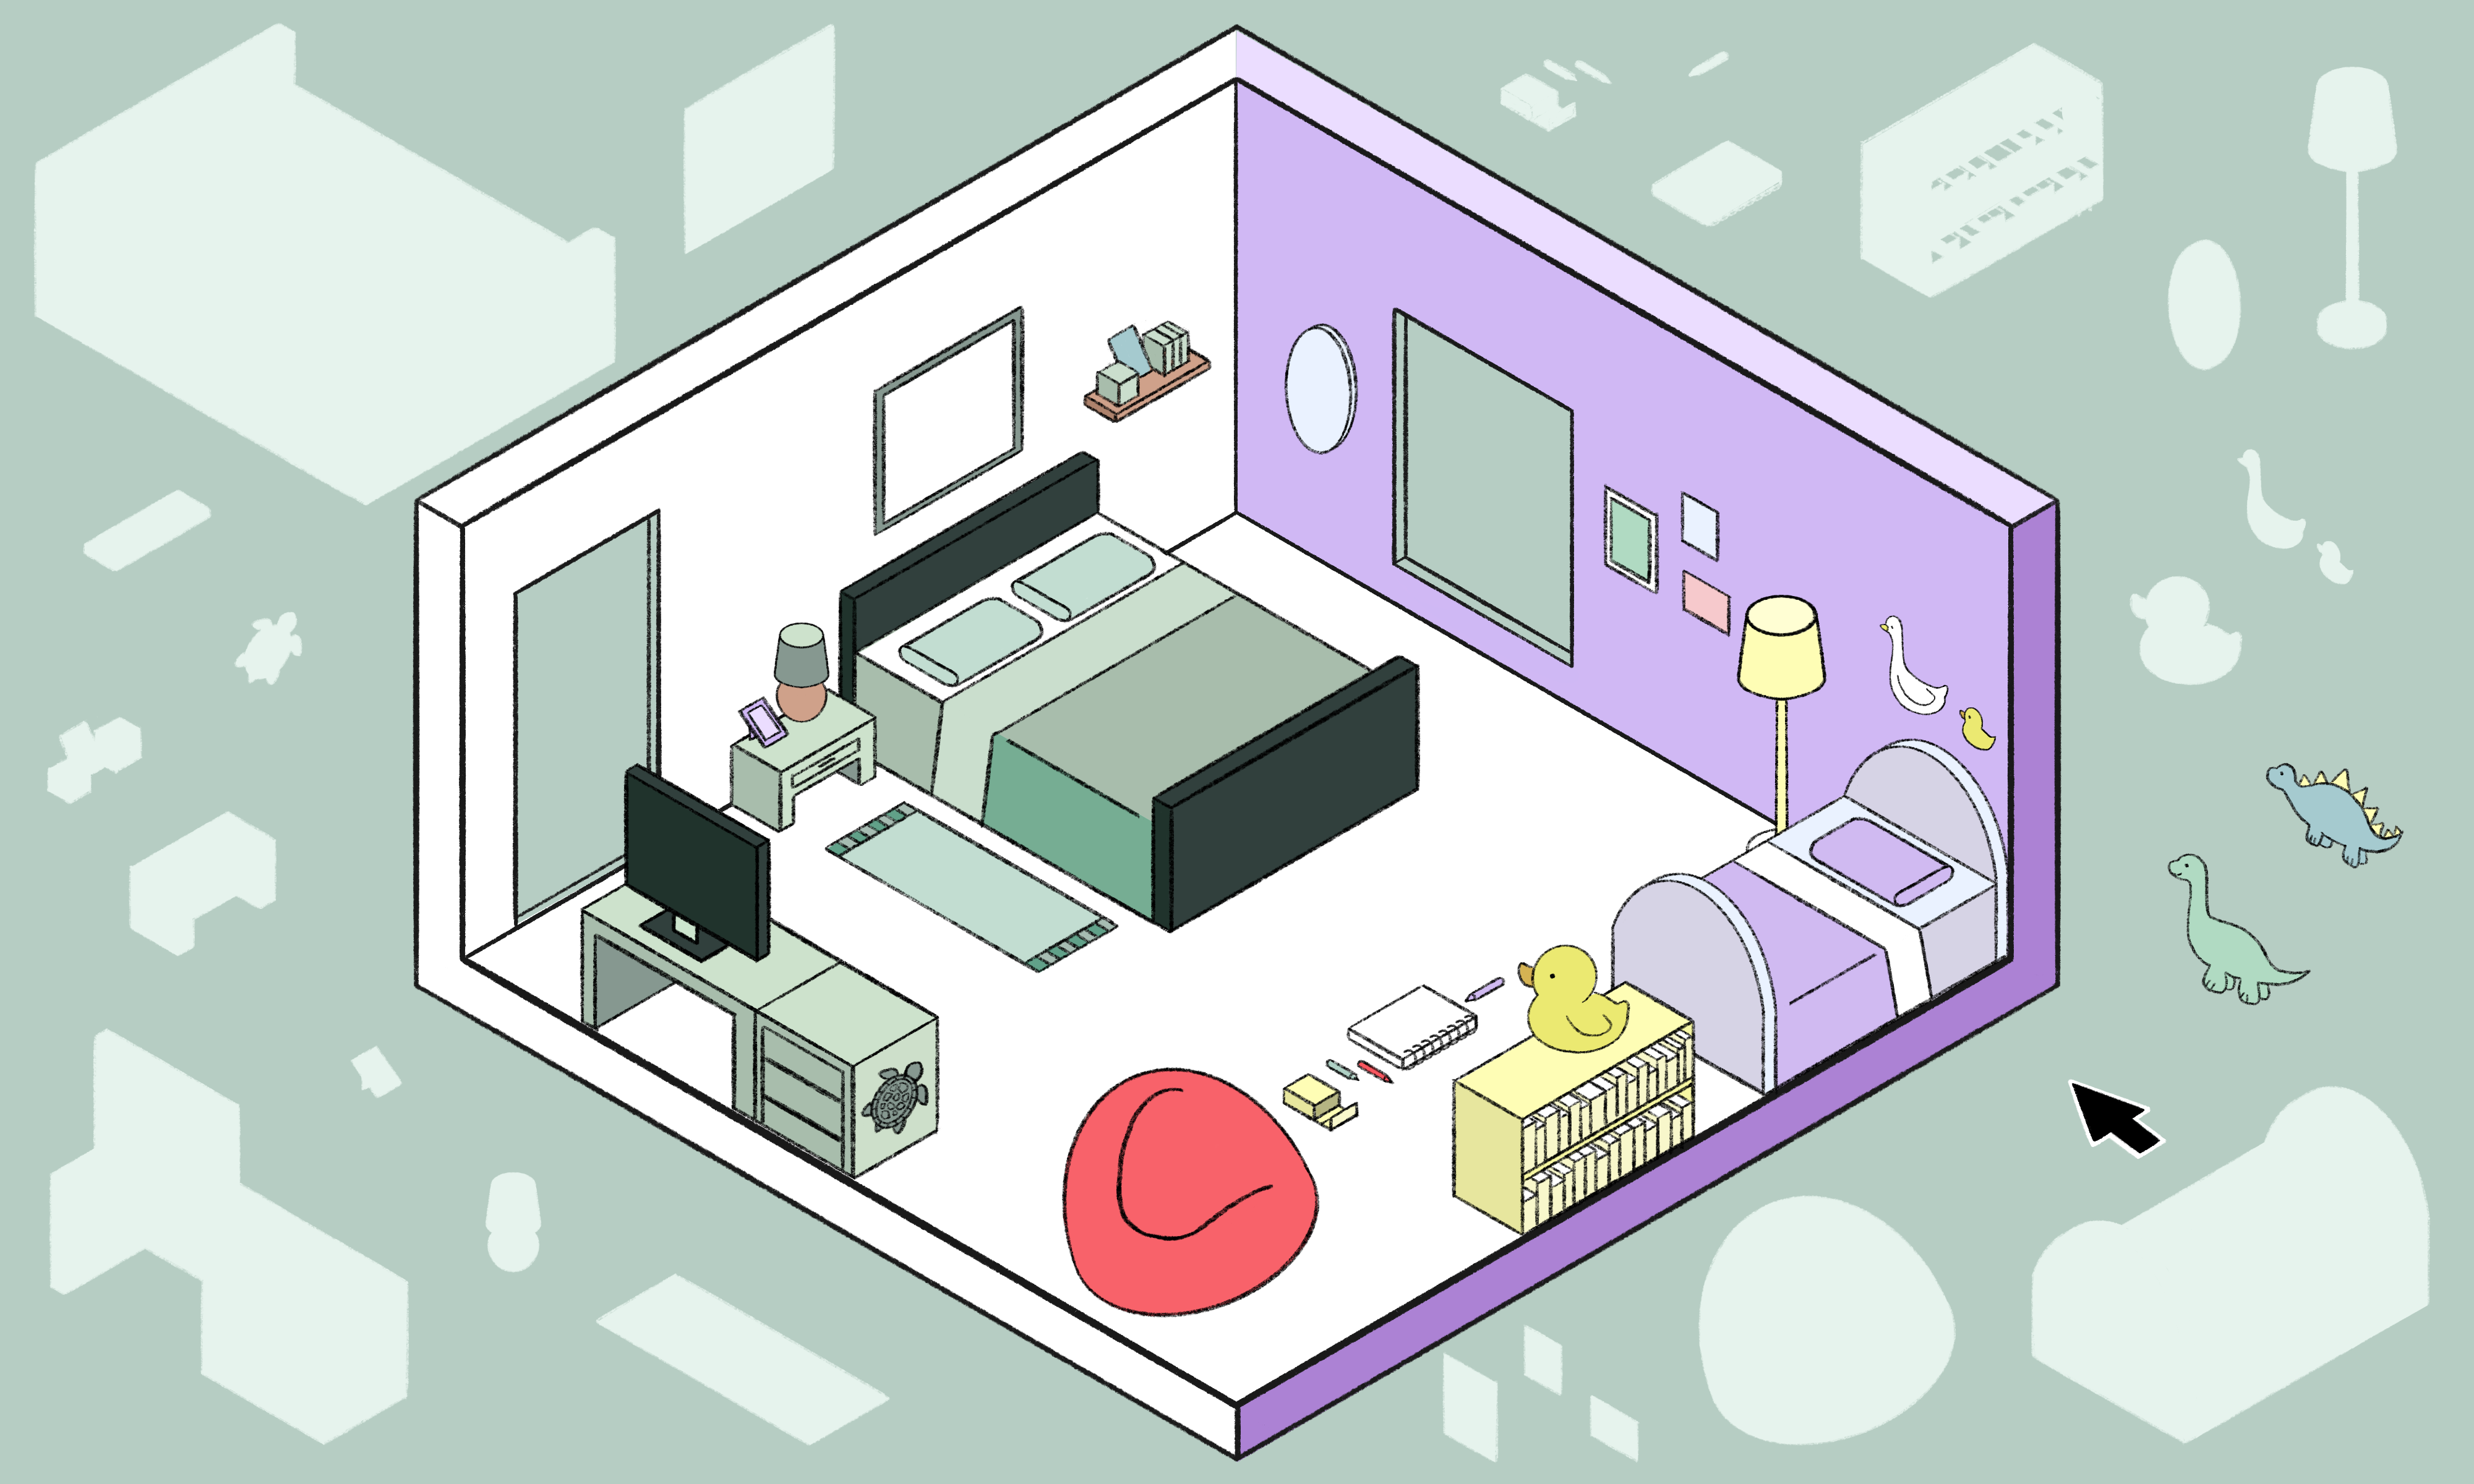 A mouse cursor goes back and forth toggling between dinosaur and duck theme decorations for a digital diagram of a room. The room is furnished with two beds, a desk, a bean bag chair and numerous other items. The left side of the room has a more mature, muted green palette while the right side of the room is more vibrant, with lilac, yellow, and red highlights.